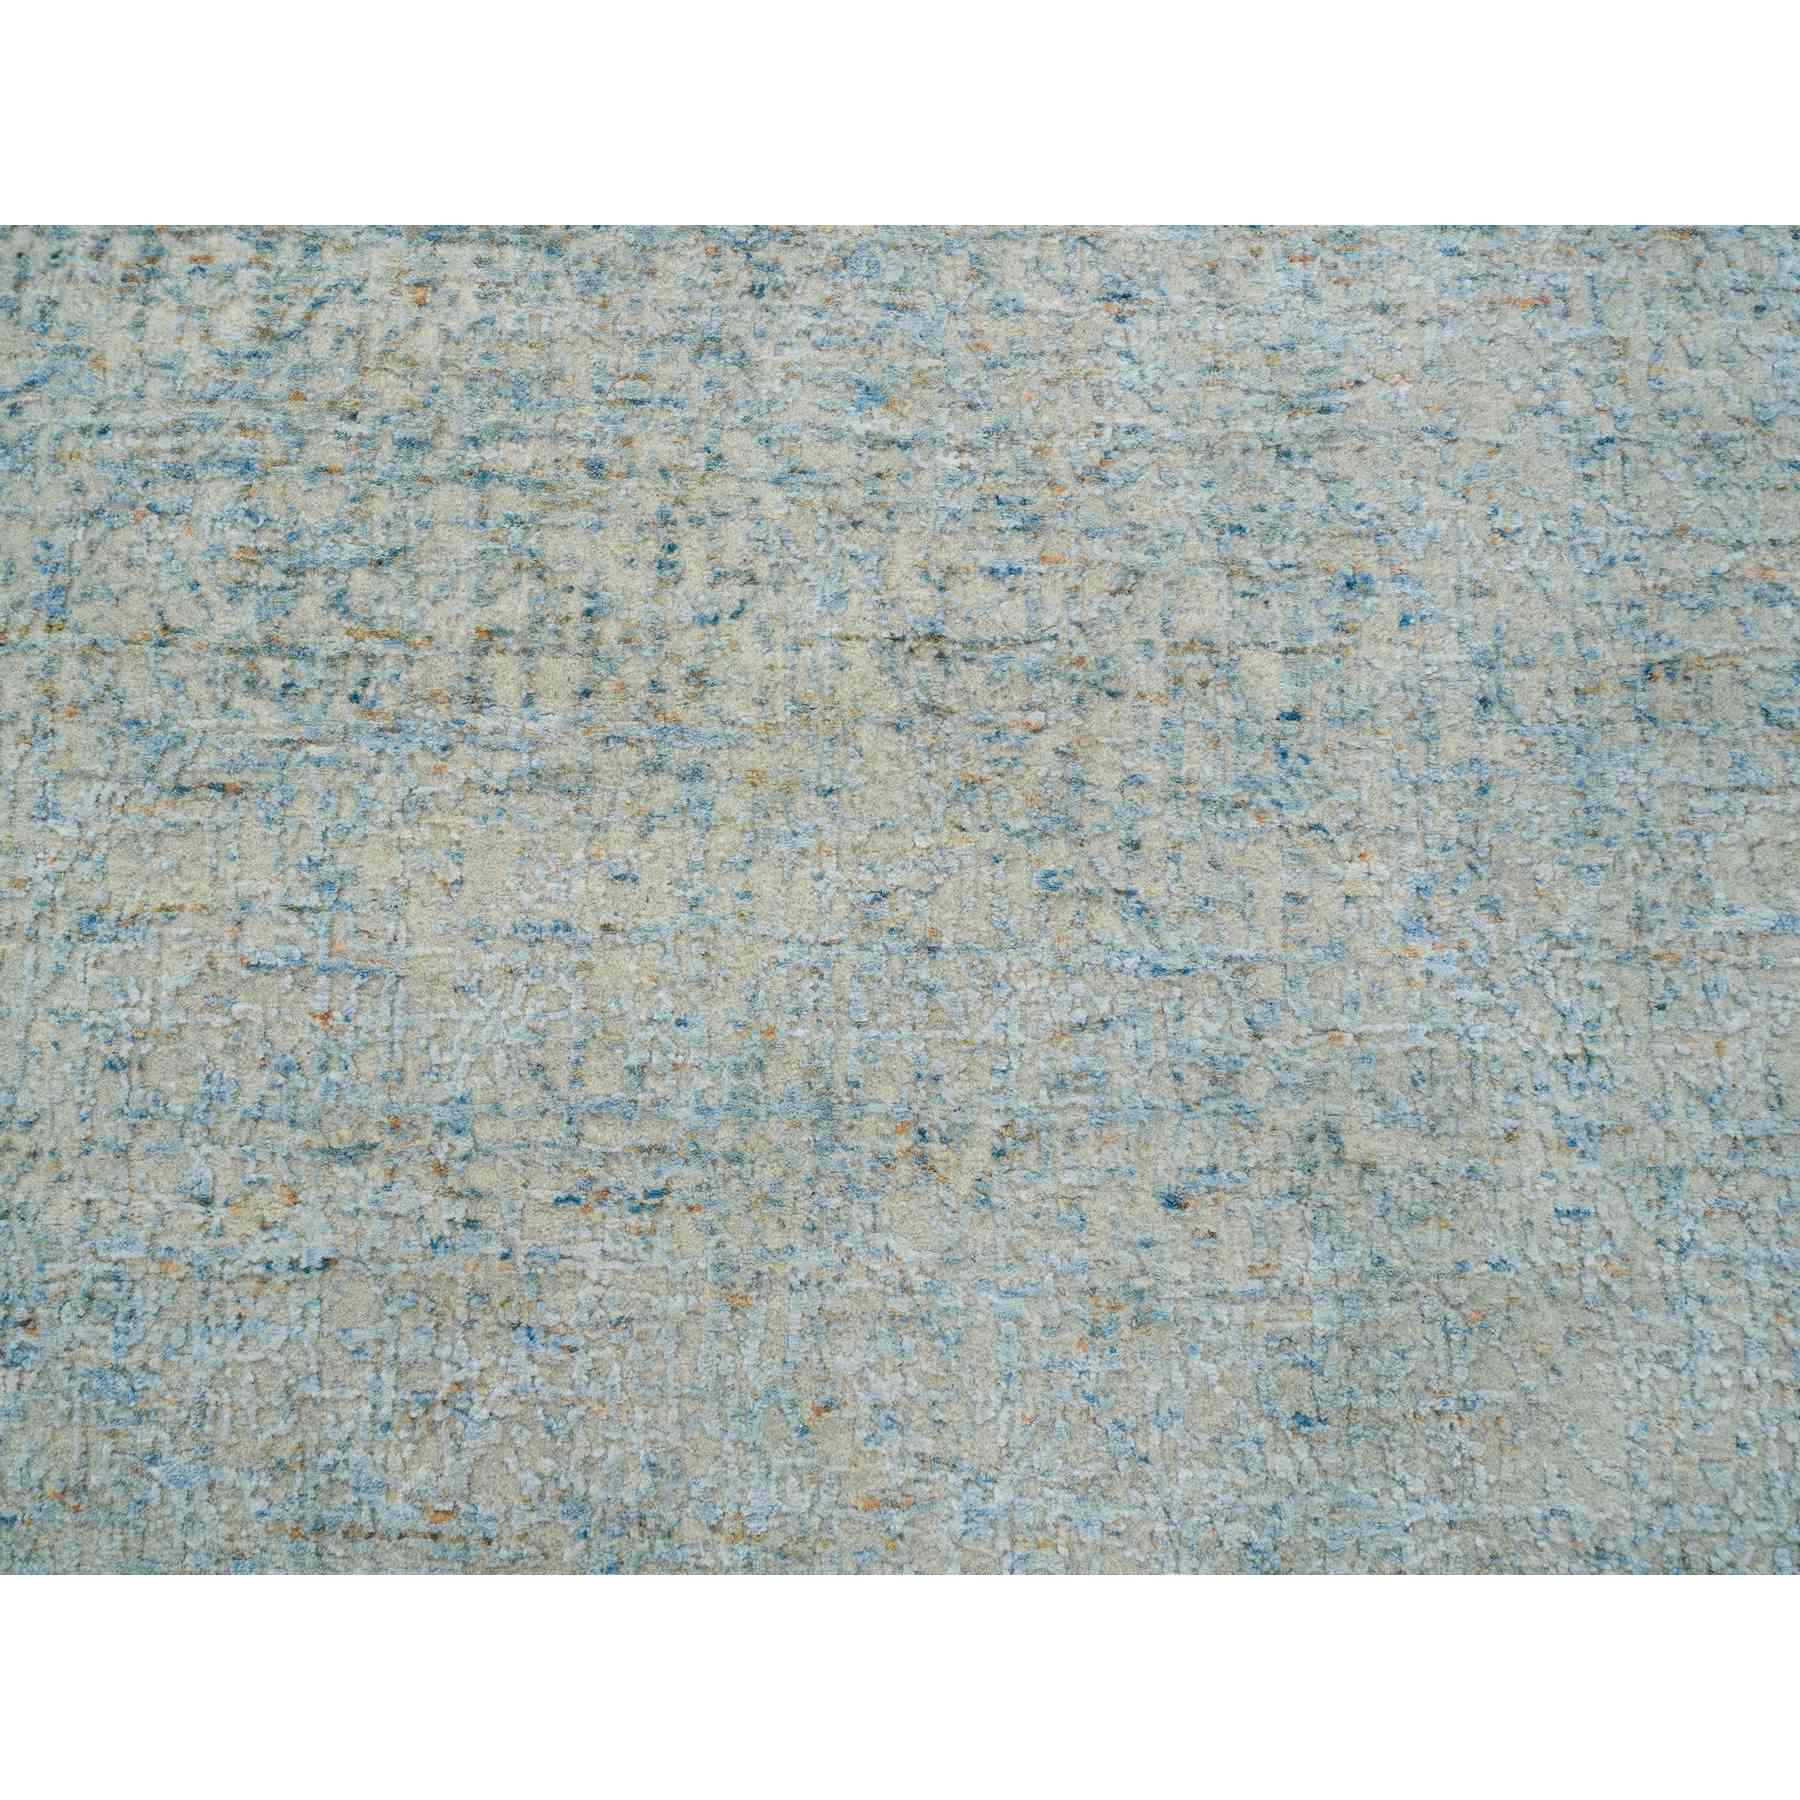 Modern-and-Contemporary-Hand-Loomed-Rug-325980